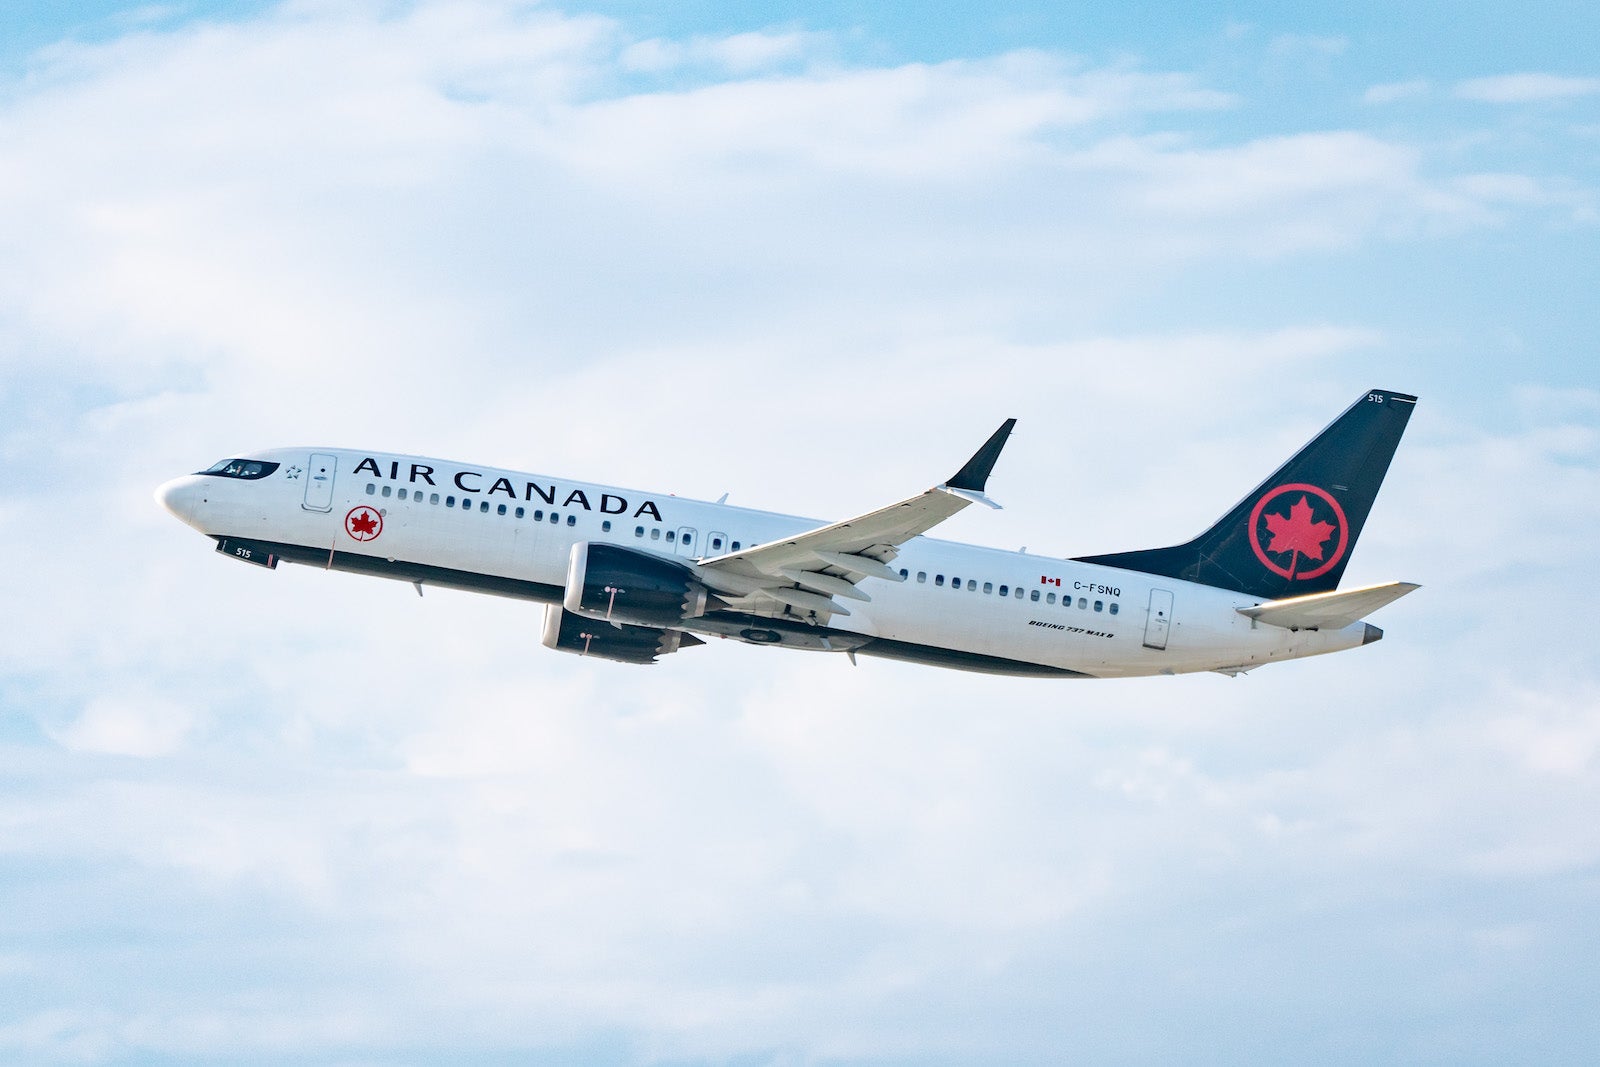 Air Canada plane over LAX airport in Los Angeles